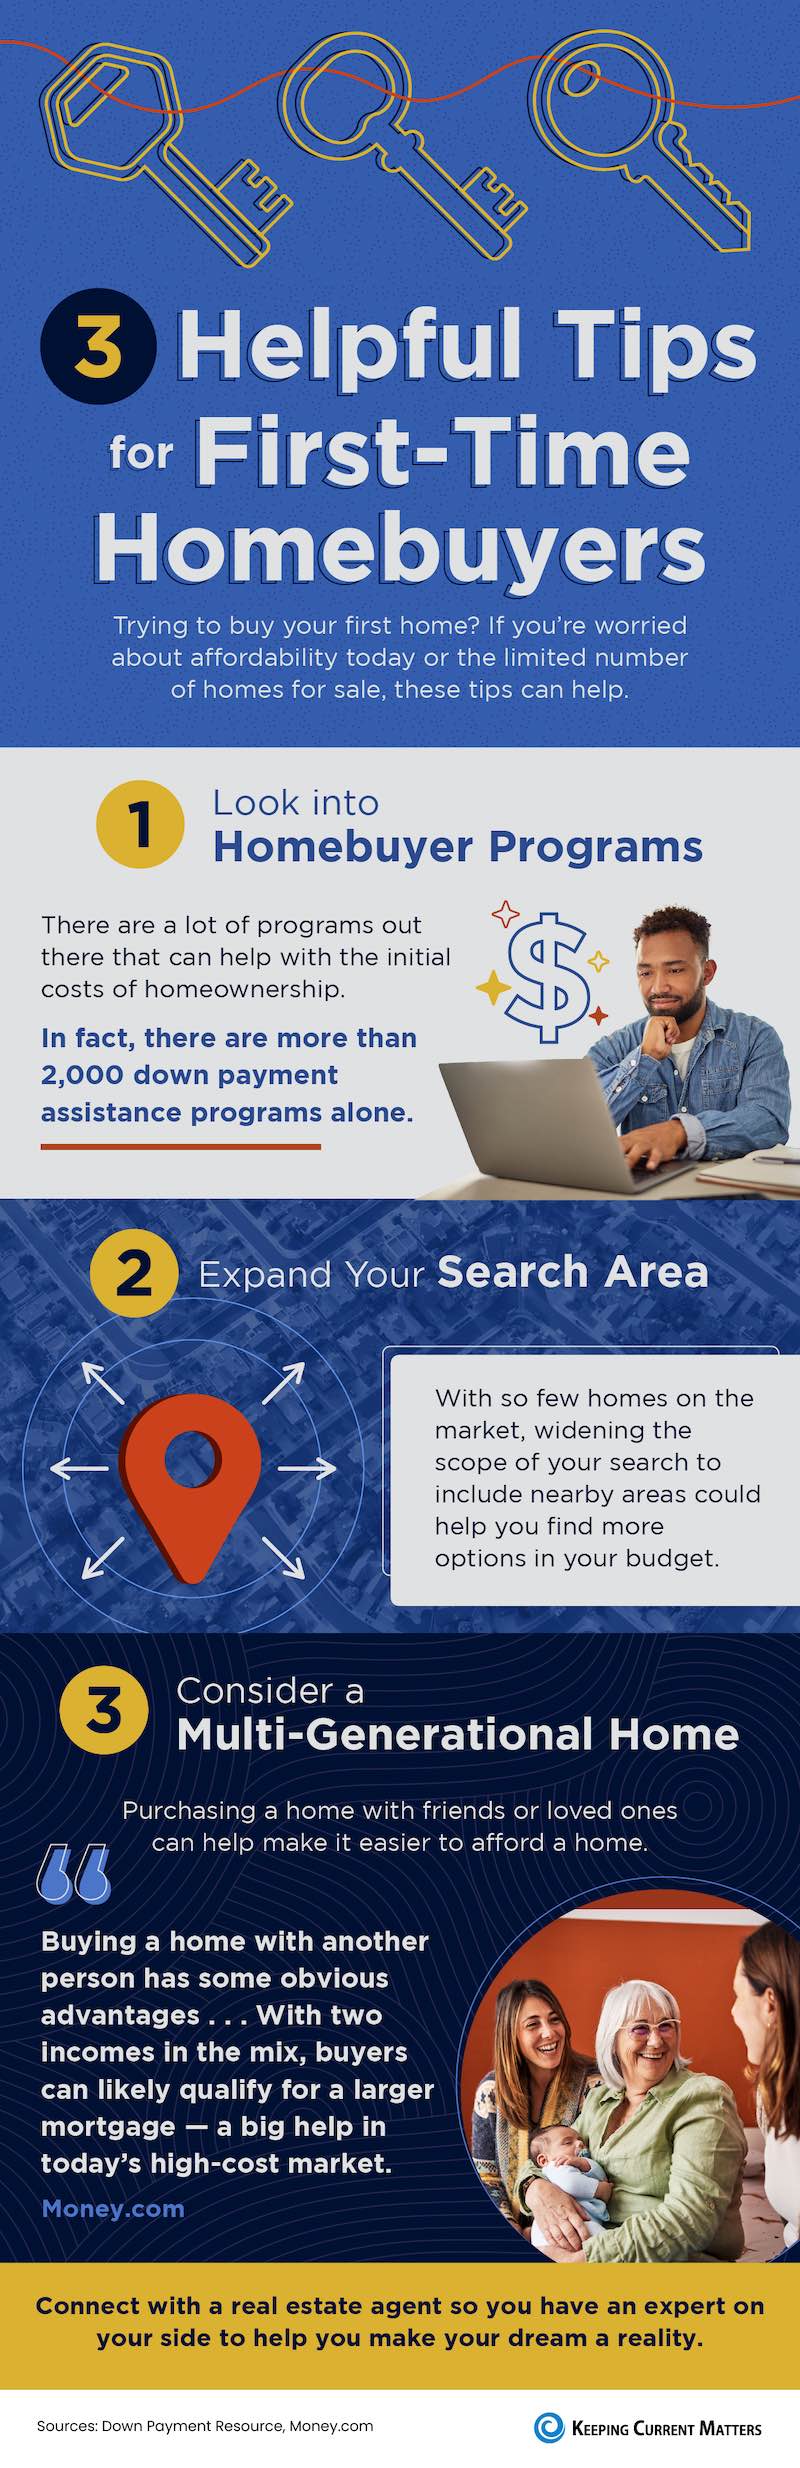 3-Helpful-Tips-for-First-Time-Homebuyers-NM.jpg